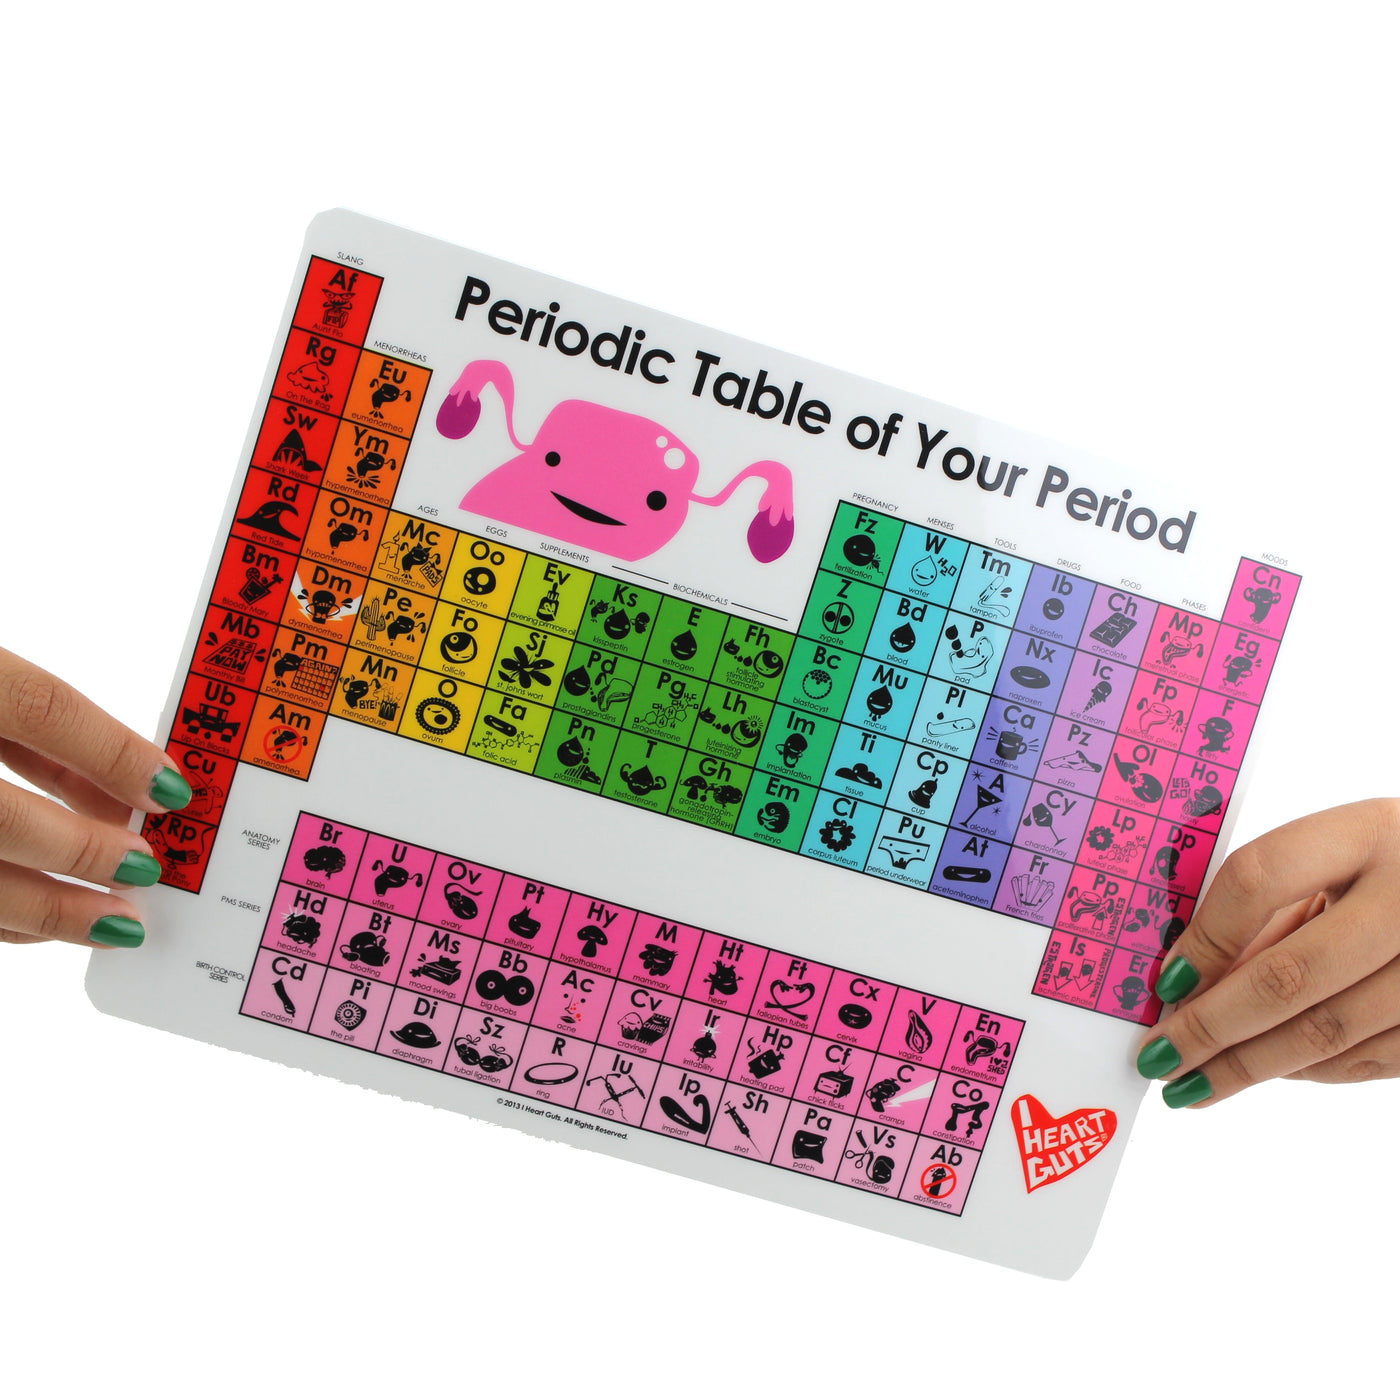 Periodic Table of Your Period - Funny Menstrual Humor Poster Infographic